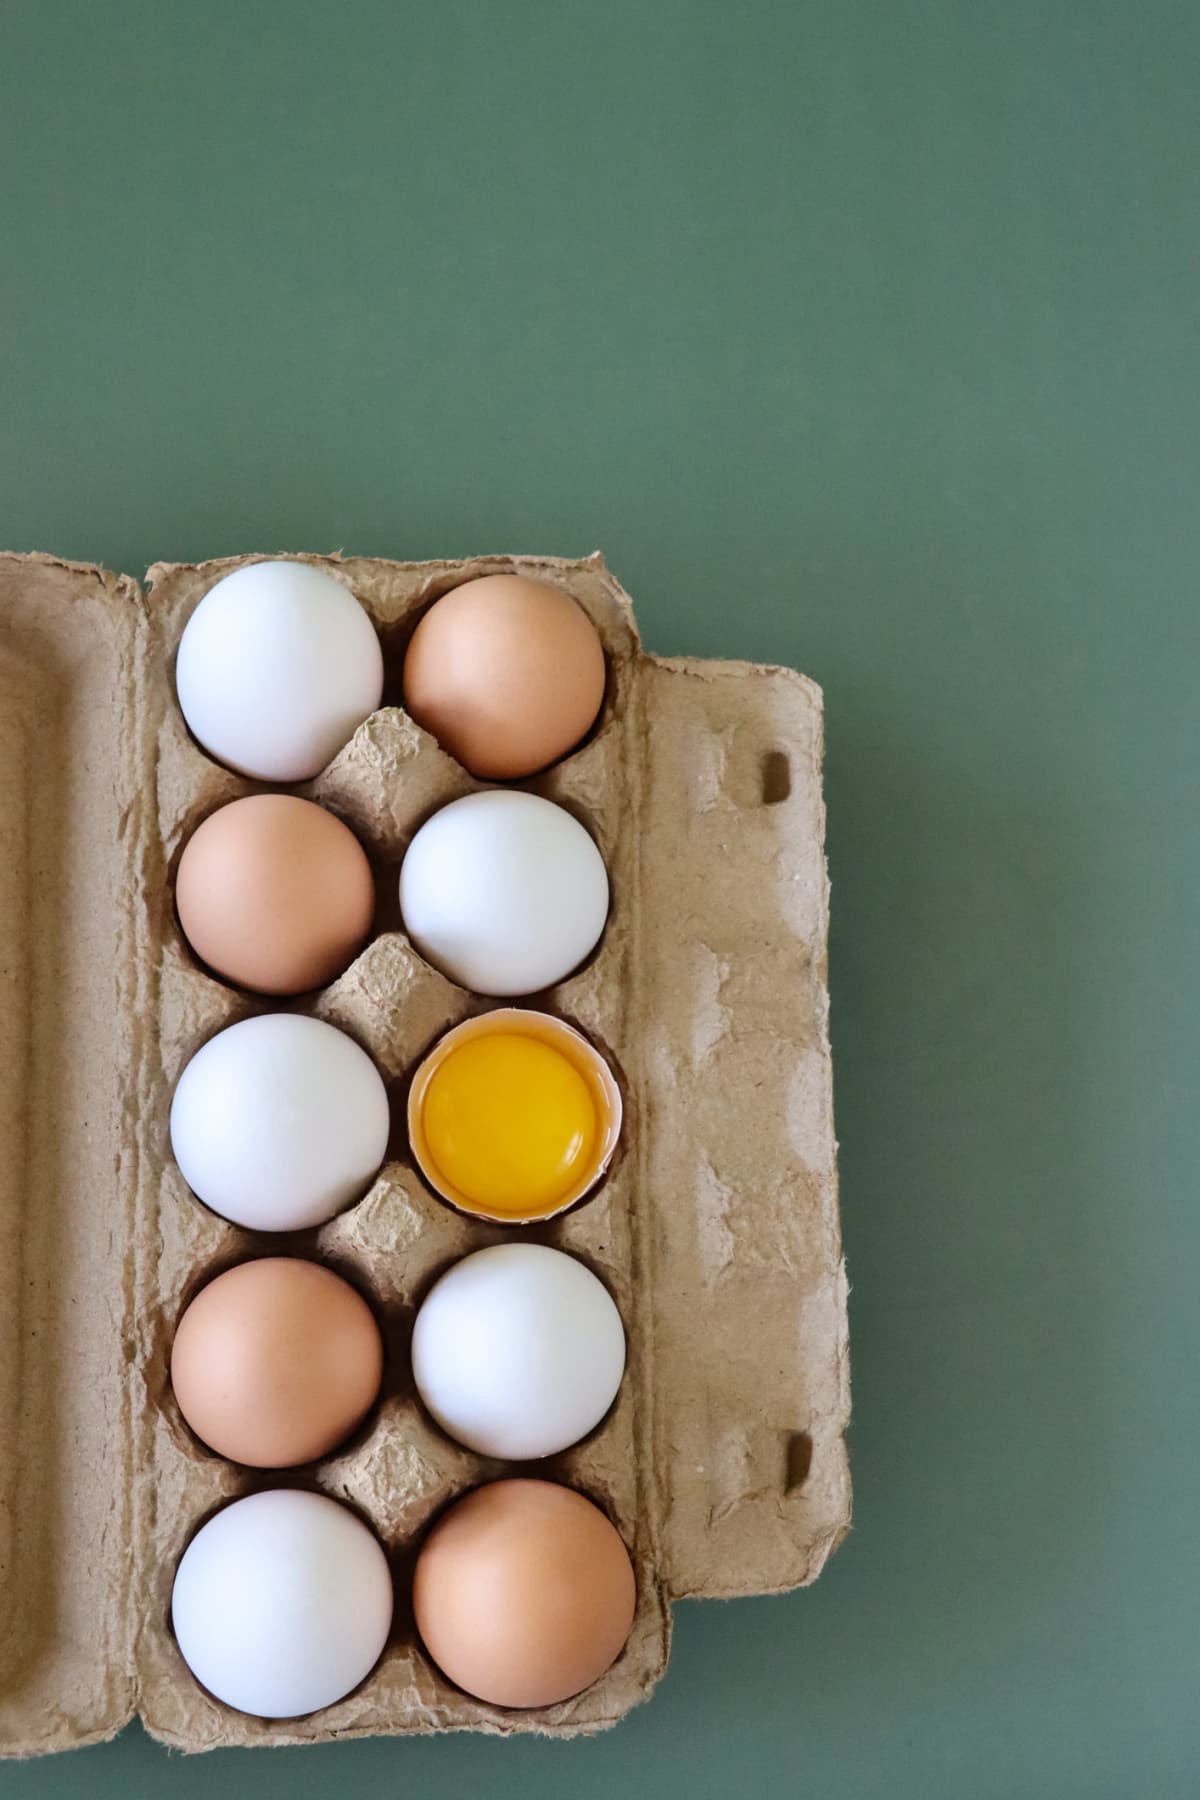 Stock photo showing elevated view of batch of ten mixed white and brown coloured eggs in open disposable cardboard egg box on green background.